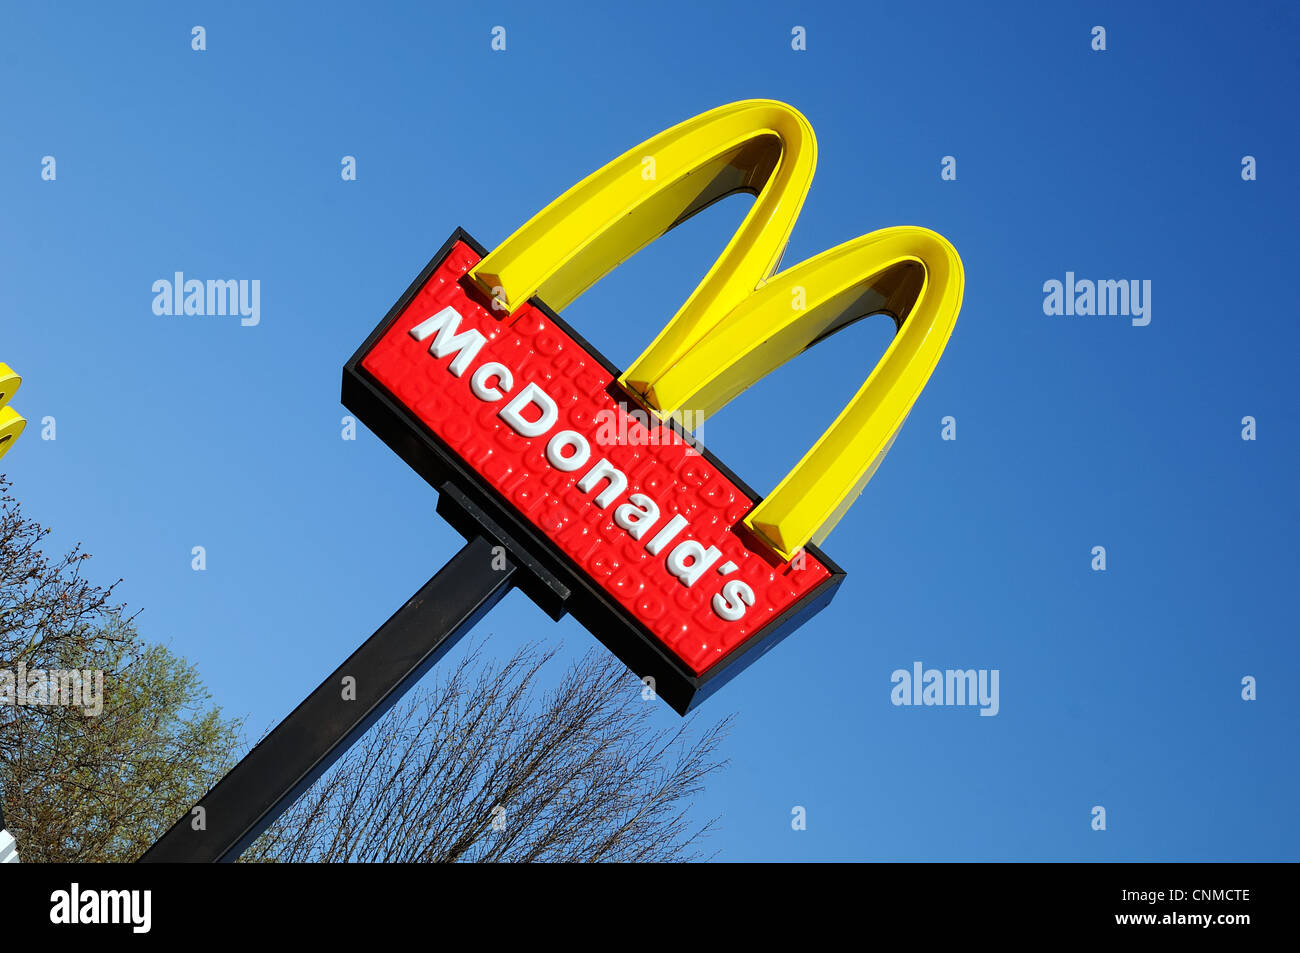 Mcdonalds Sign Uk High Resolution Stock Photography and Images - Alamy